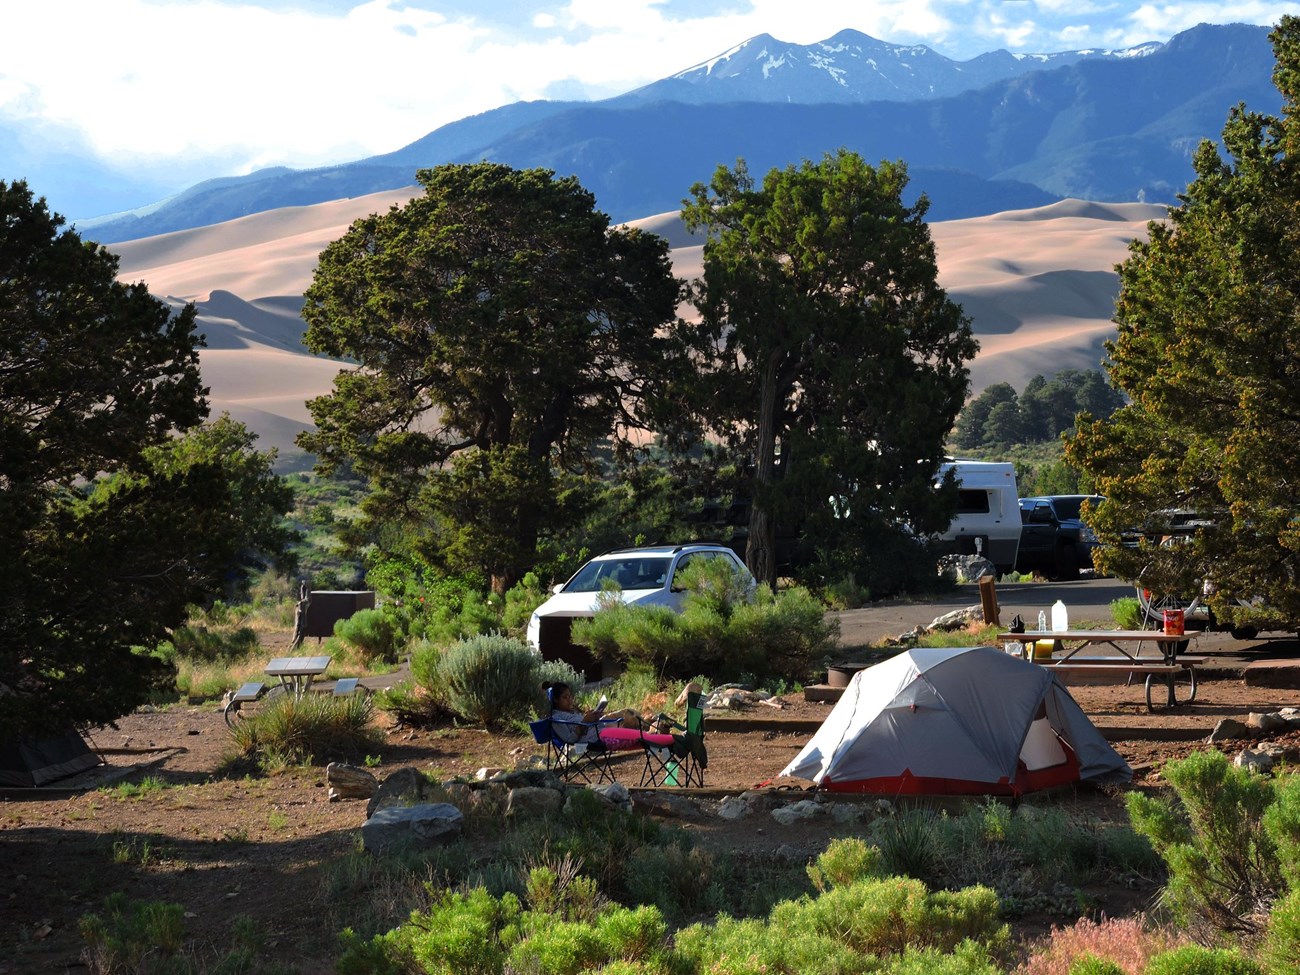 Best all-in-one vehicles for summer camping